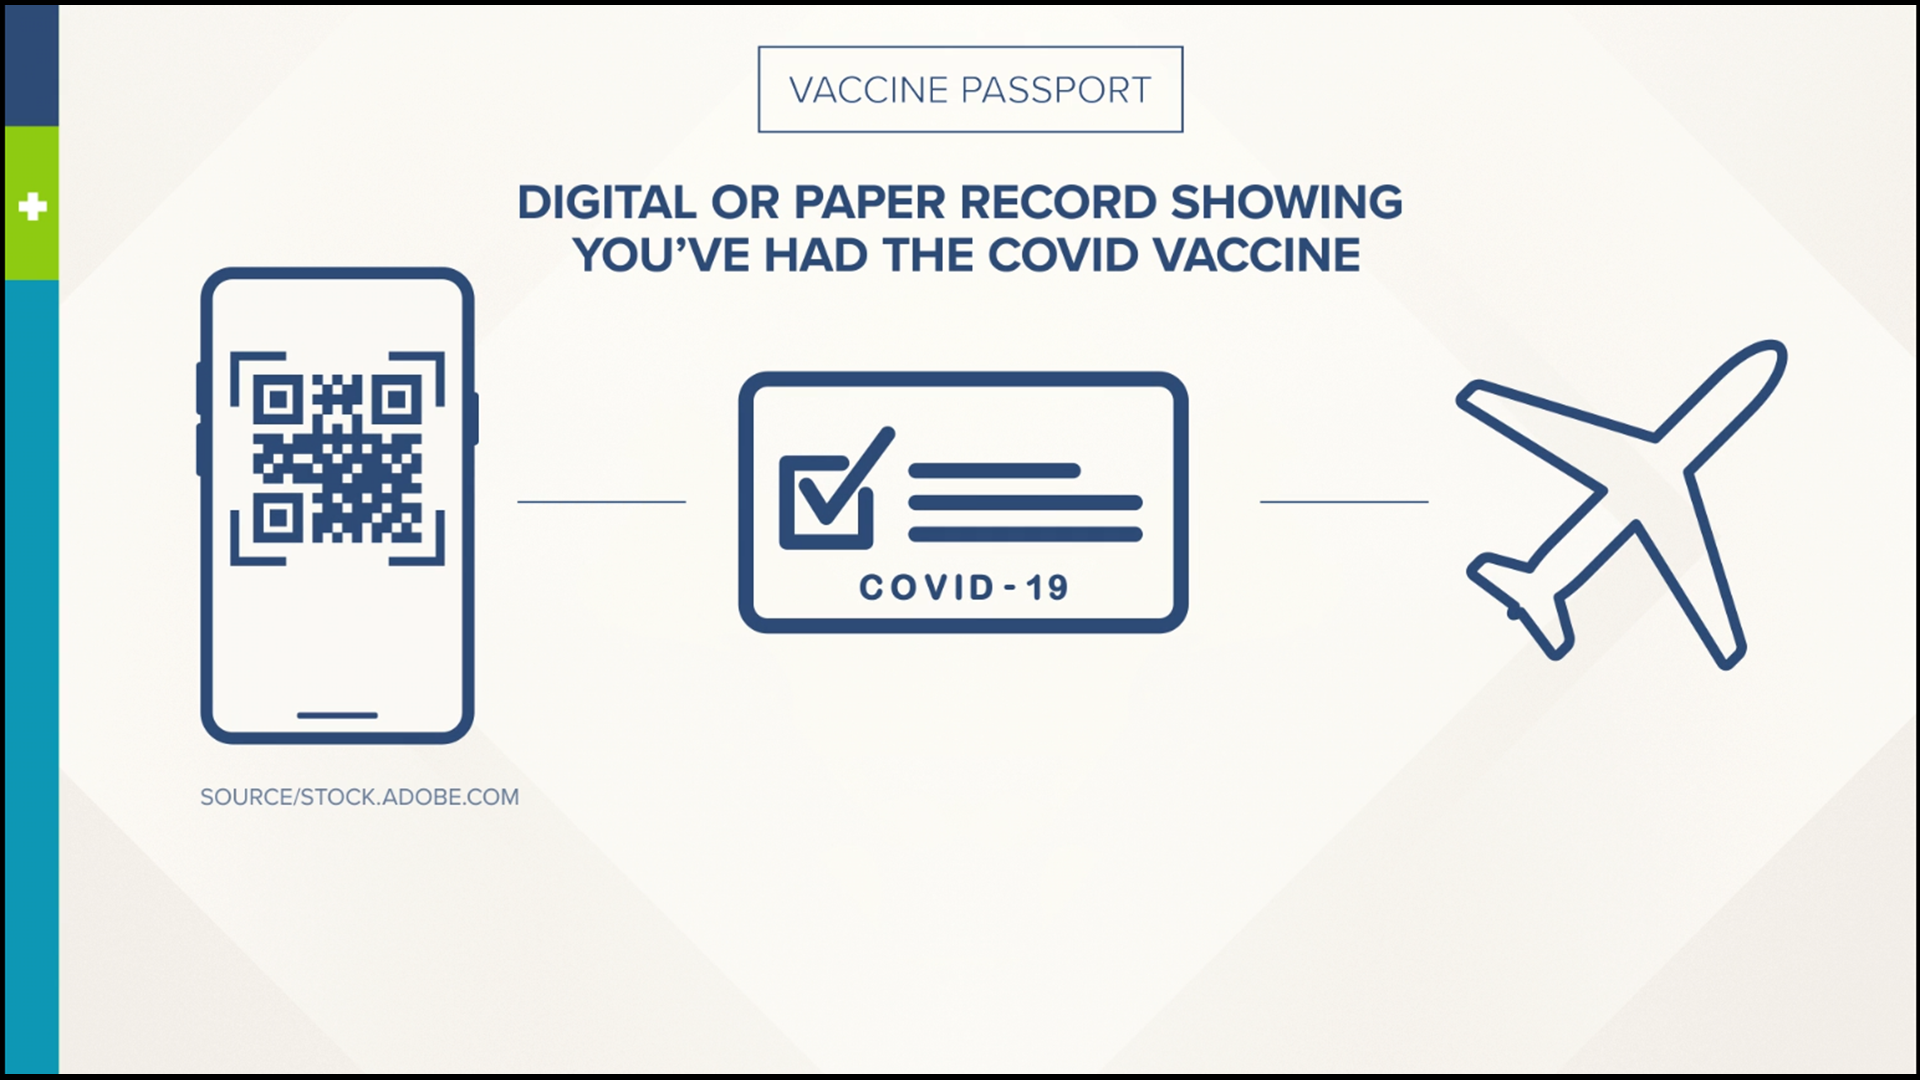 Vaccine passports are not being used in the U.S., but misinformation about a federally-mandated system persists.